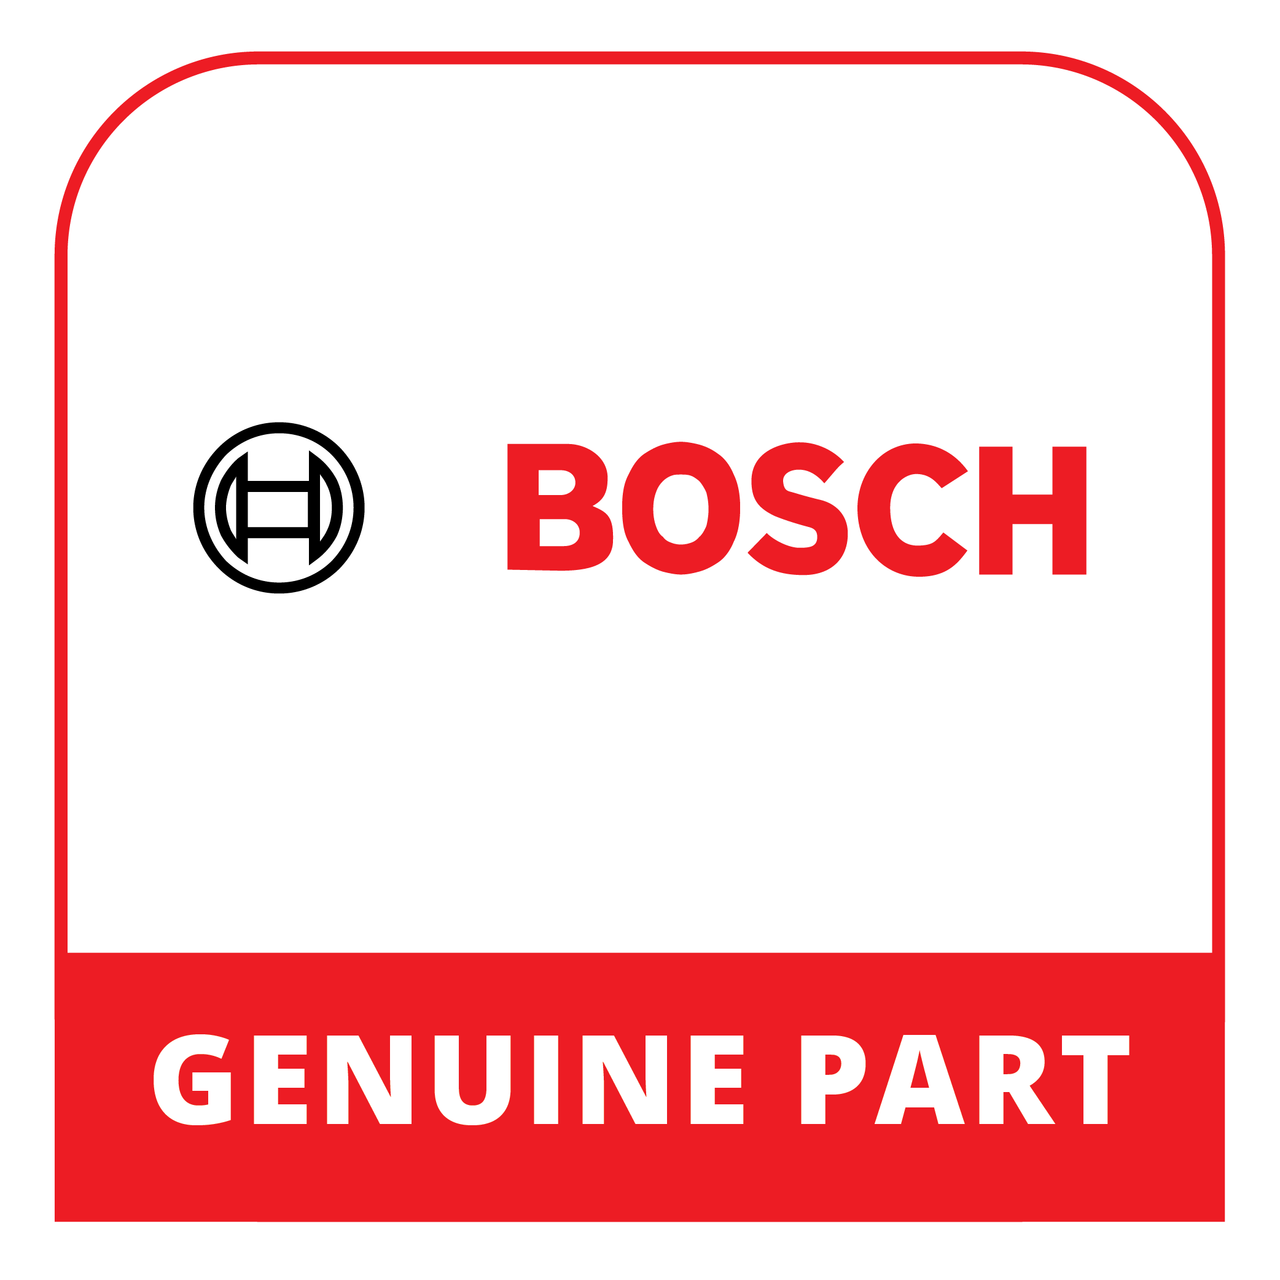 Bosch (Thermador) 18080489 - Instruction Manual - Genuine Bosch (Thermador) Part